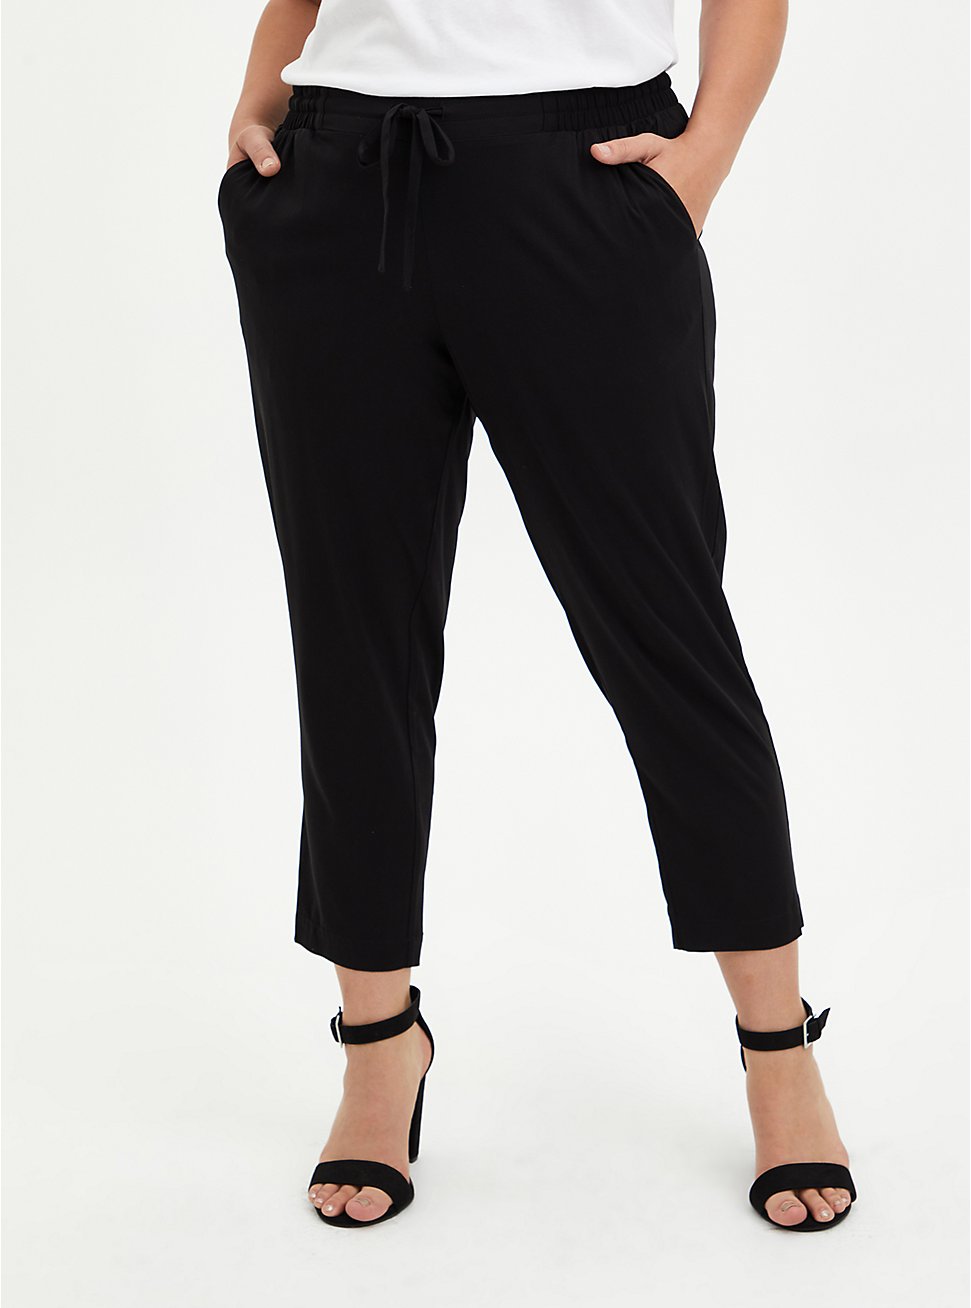 Relaxed Taper Stretch Challis High-Rise Tie-Front Pant, DEEP BLACK, hi-res